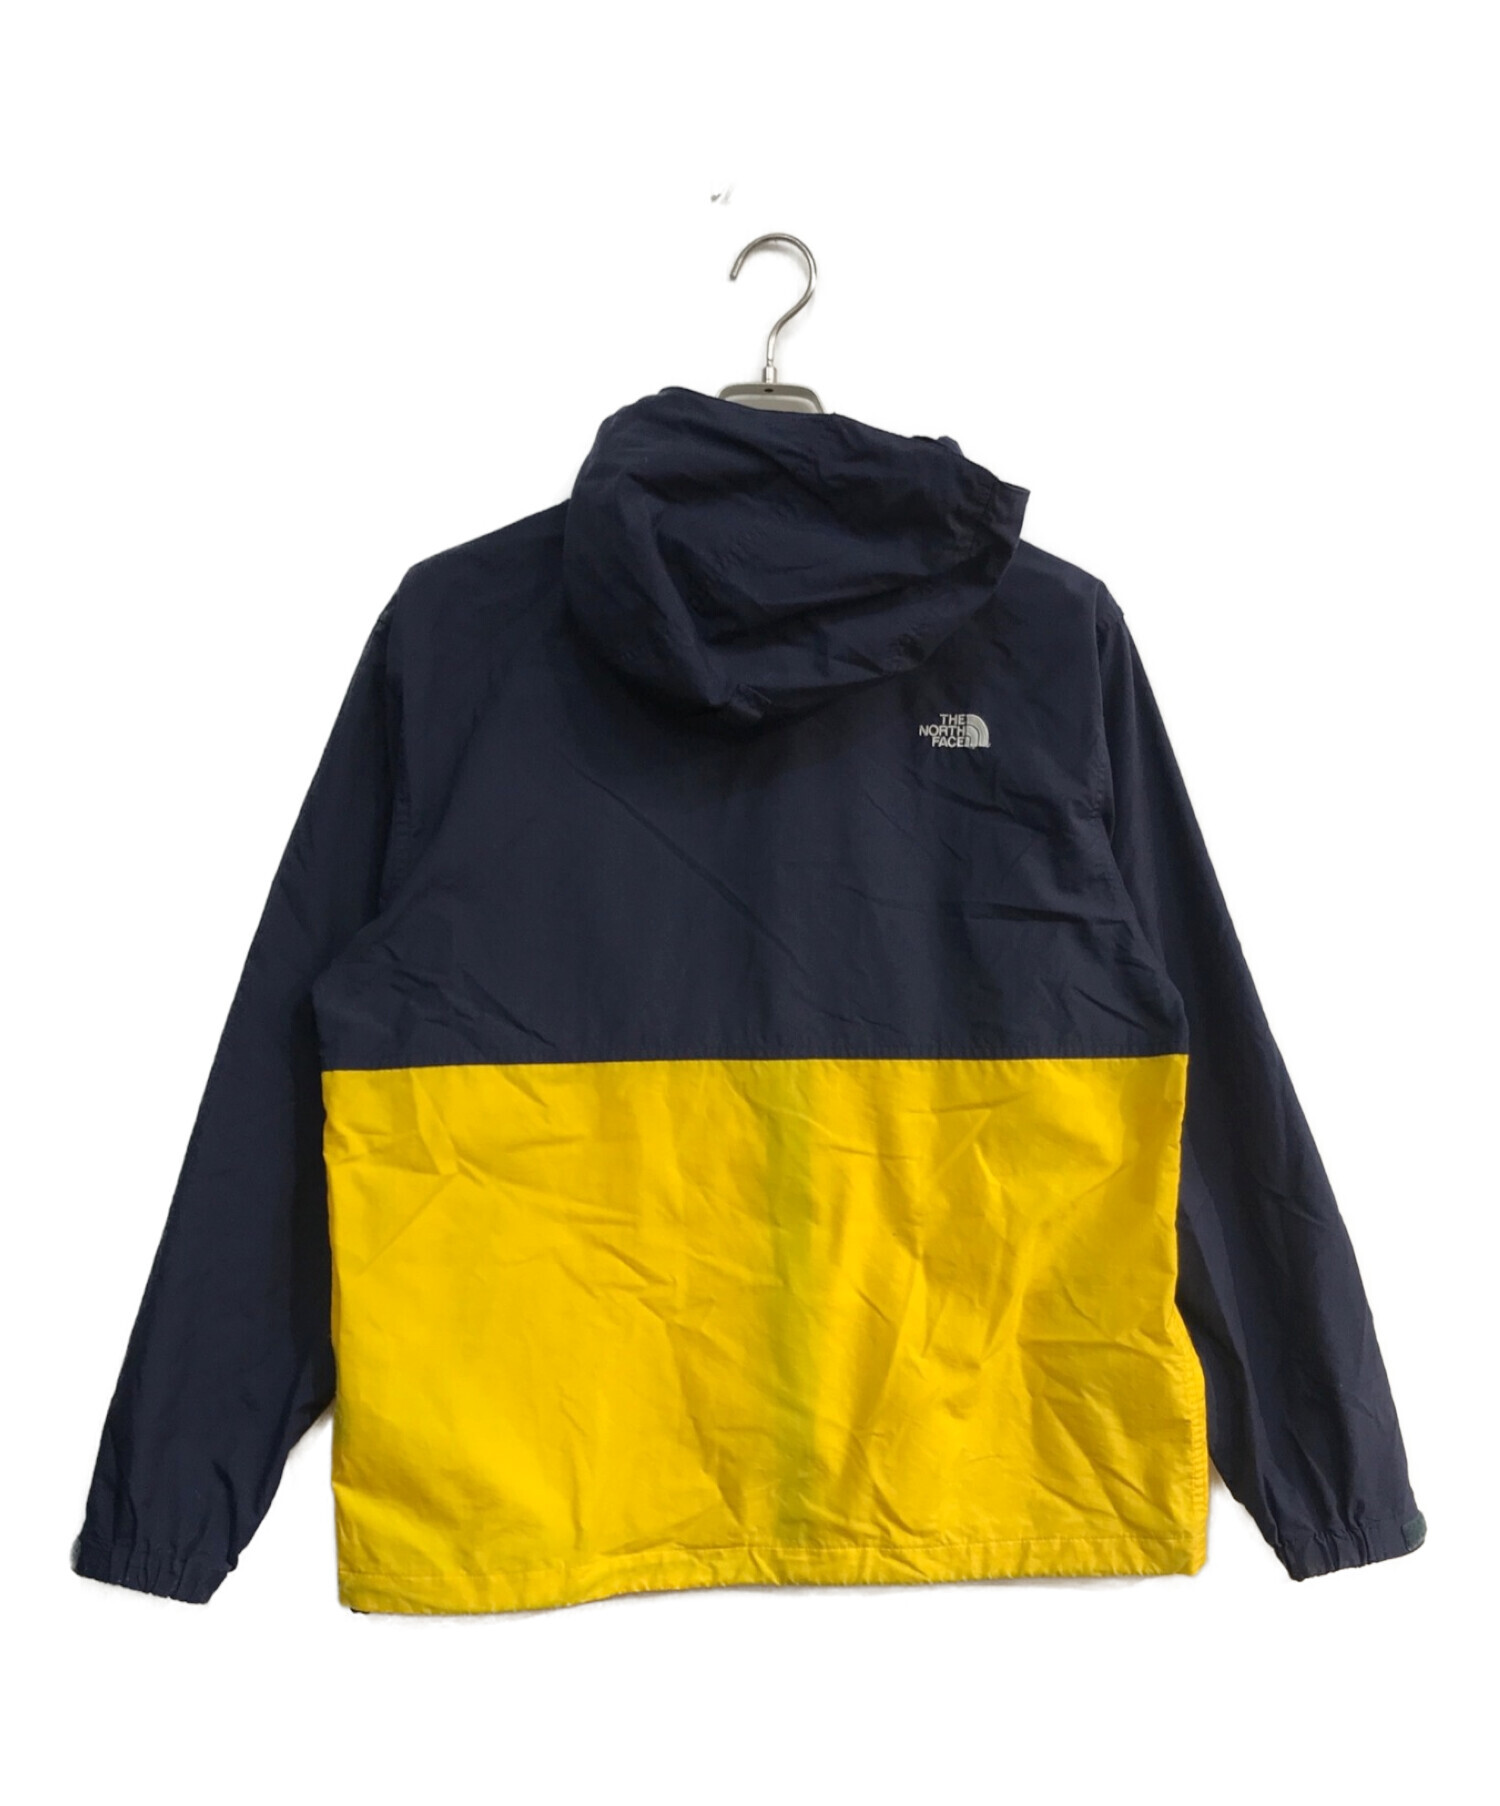 THE NORTH FACE　NP71530 ナイロン コンパクトジャケットナイロンジャケット